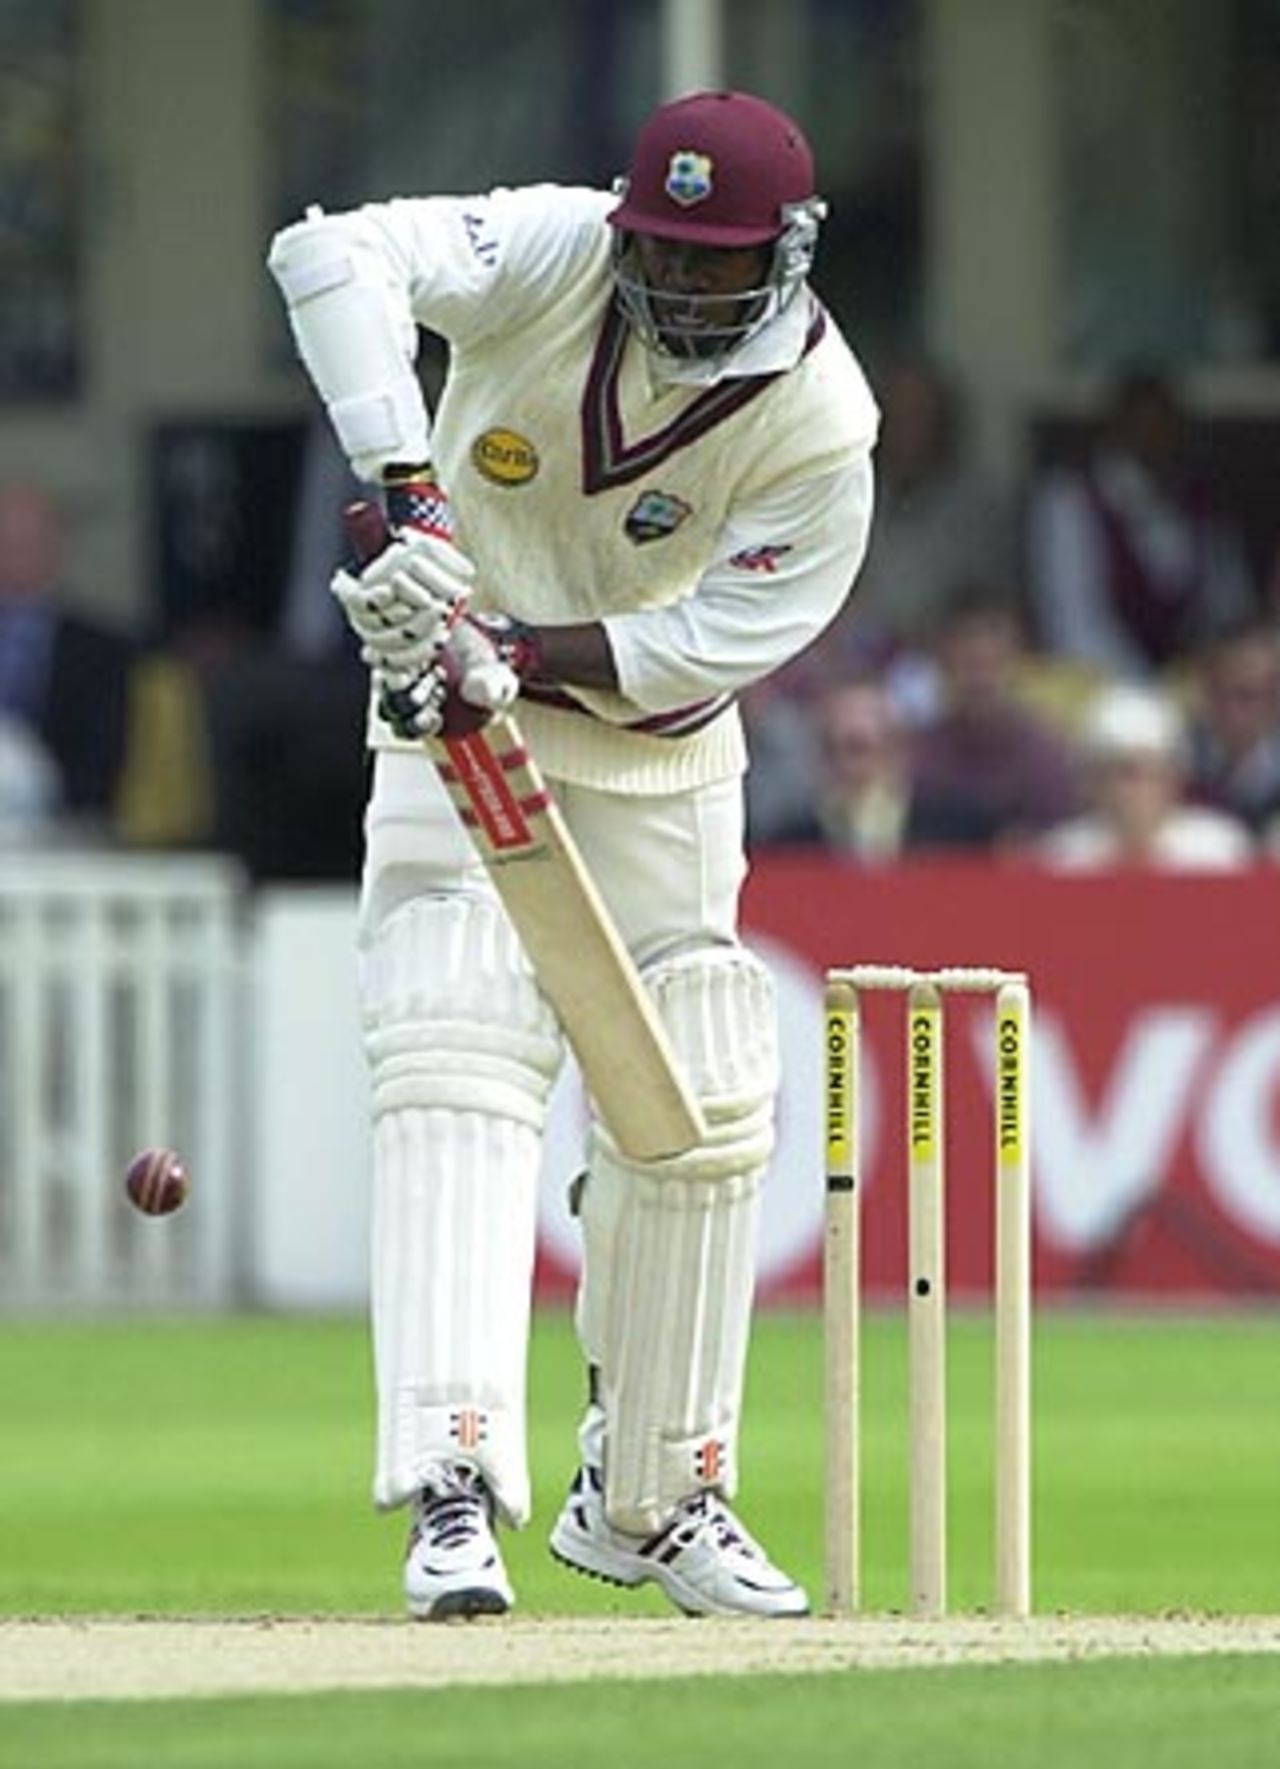 Pictured at the England v West Indies 1st Test at Birmingham 2000